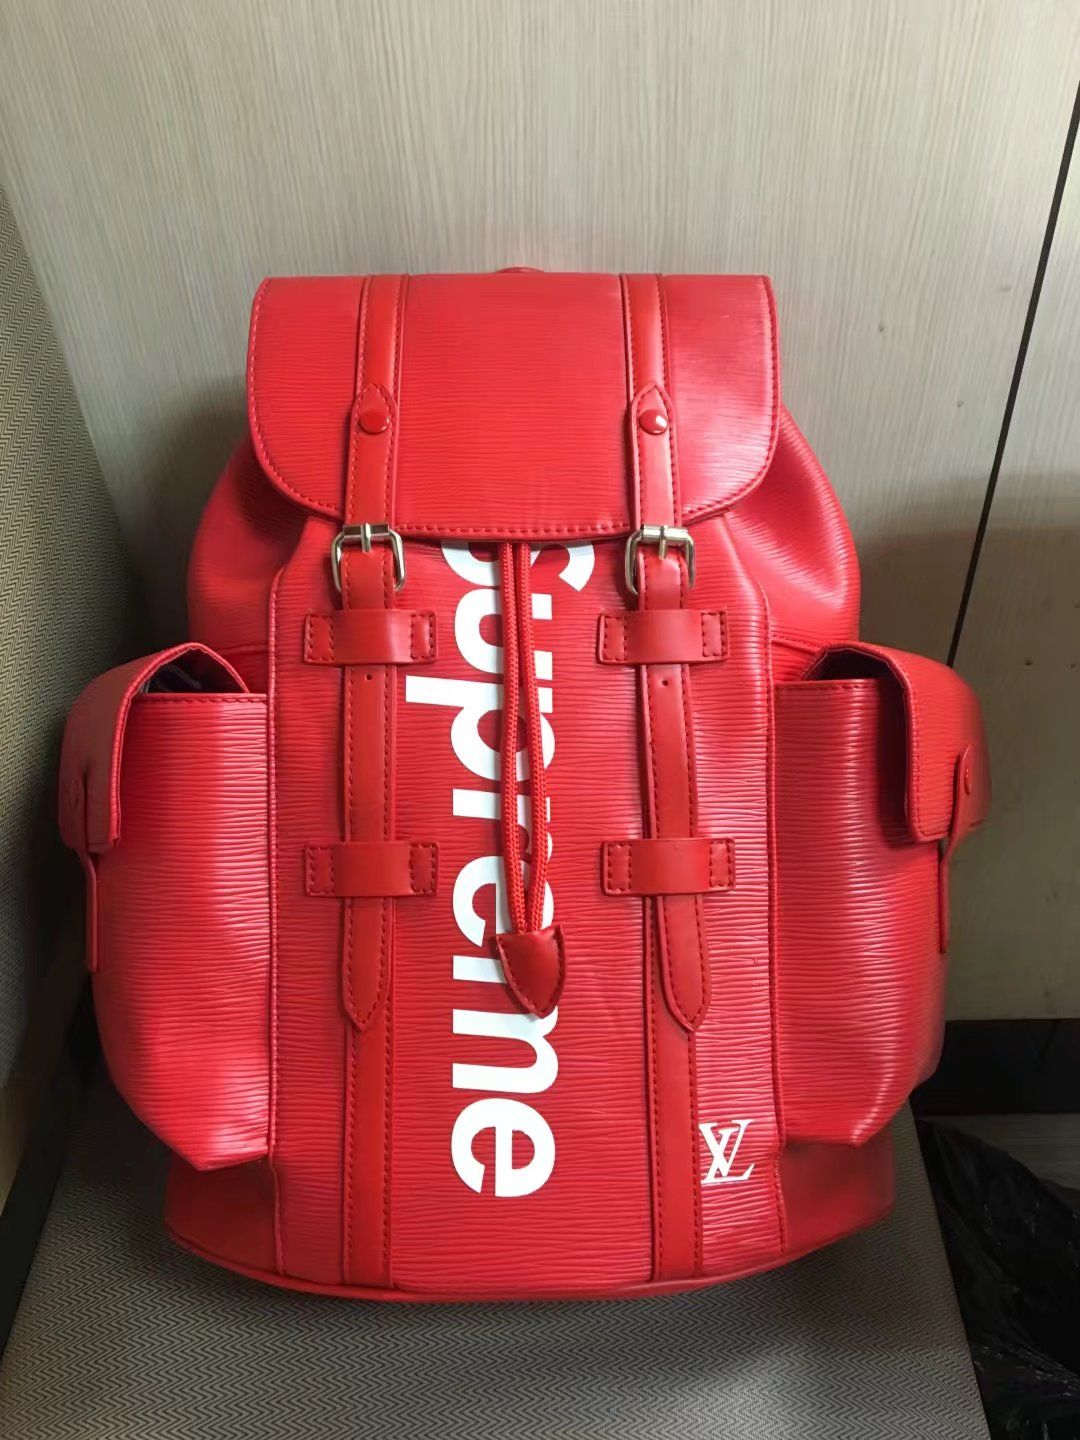 LOUIS VUITTON X SUPREME WOMEN RED LEATHER TRAVEL BAGS MEN BACKPACK SHOULDER BAGS MESSENGER BAGS